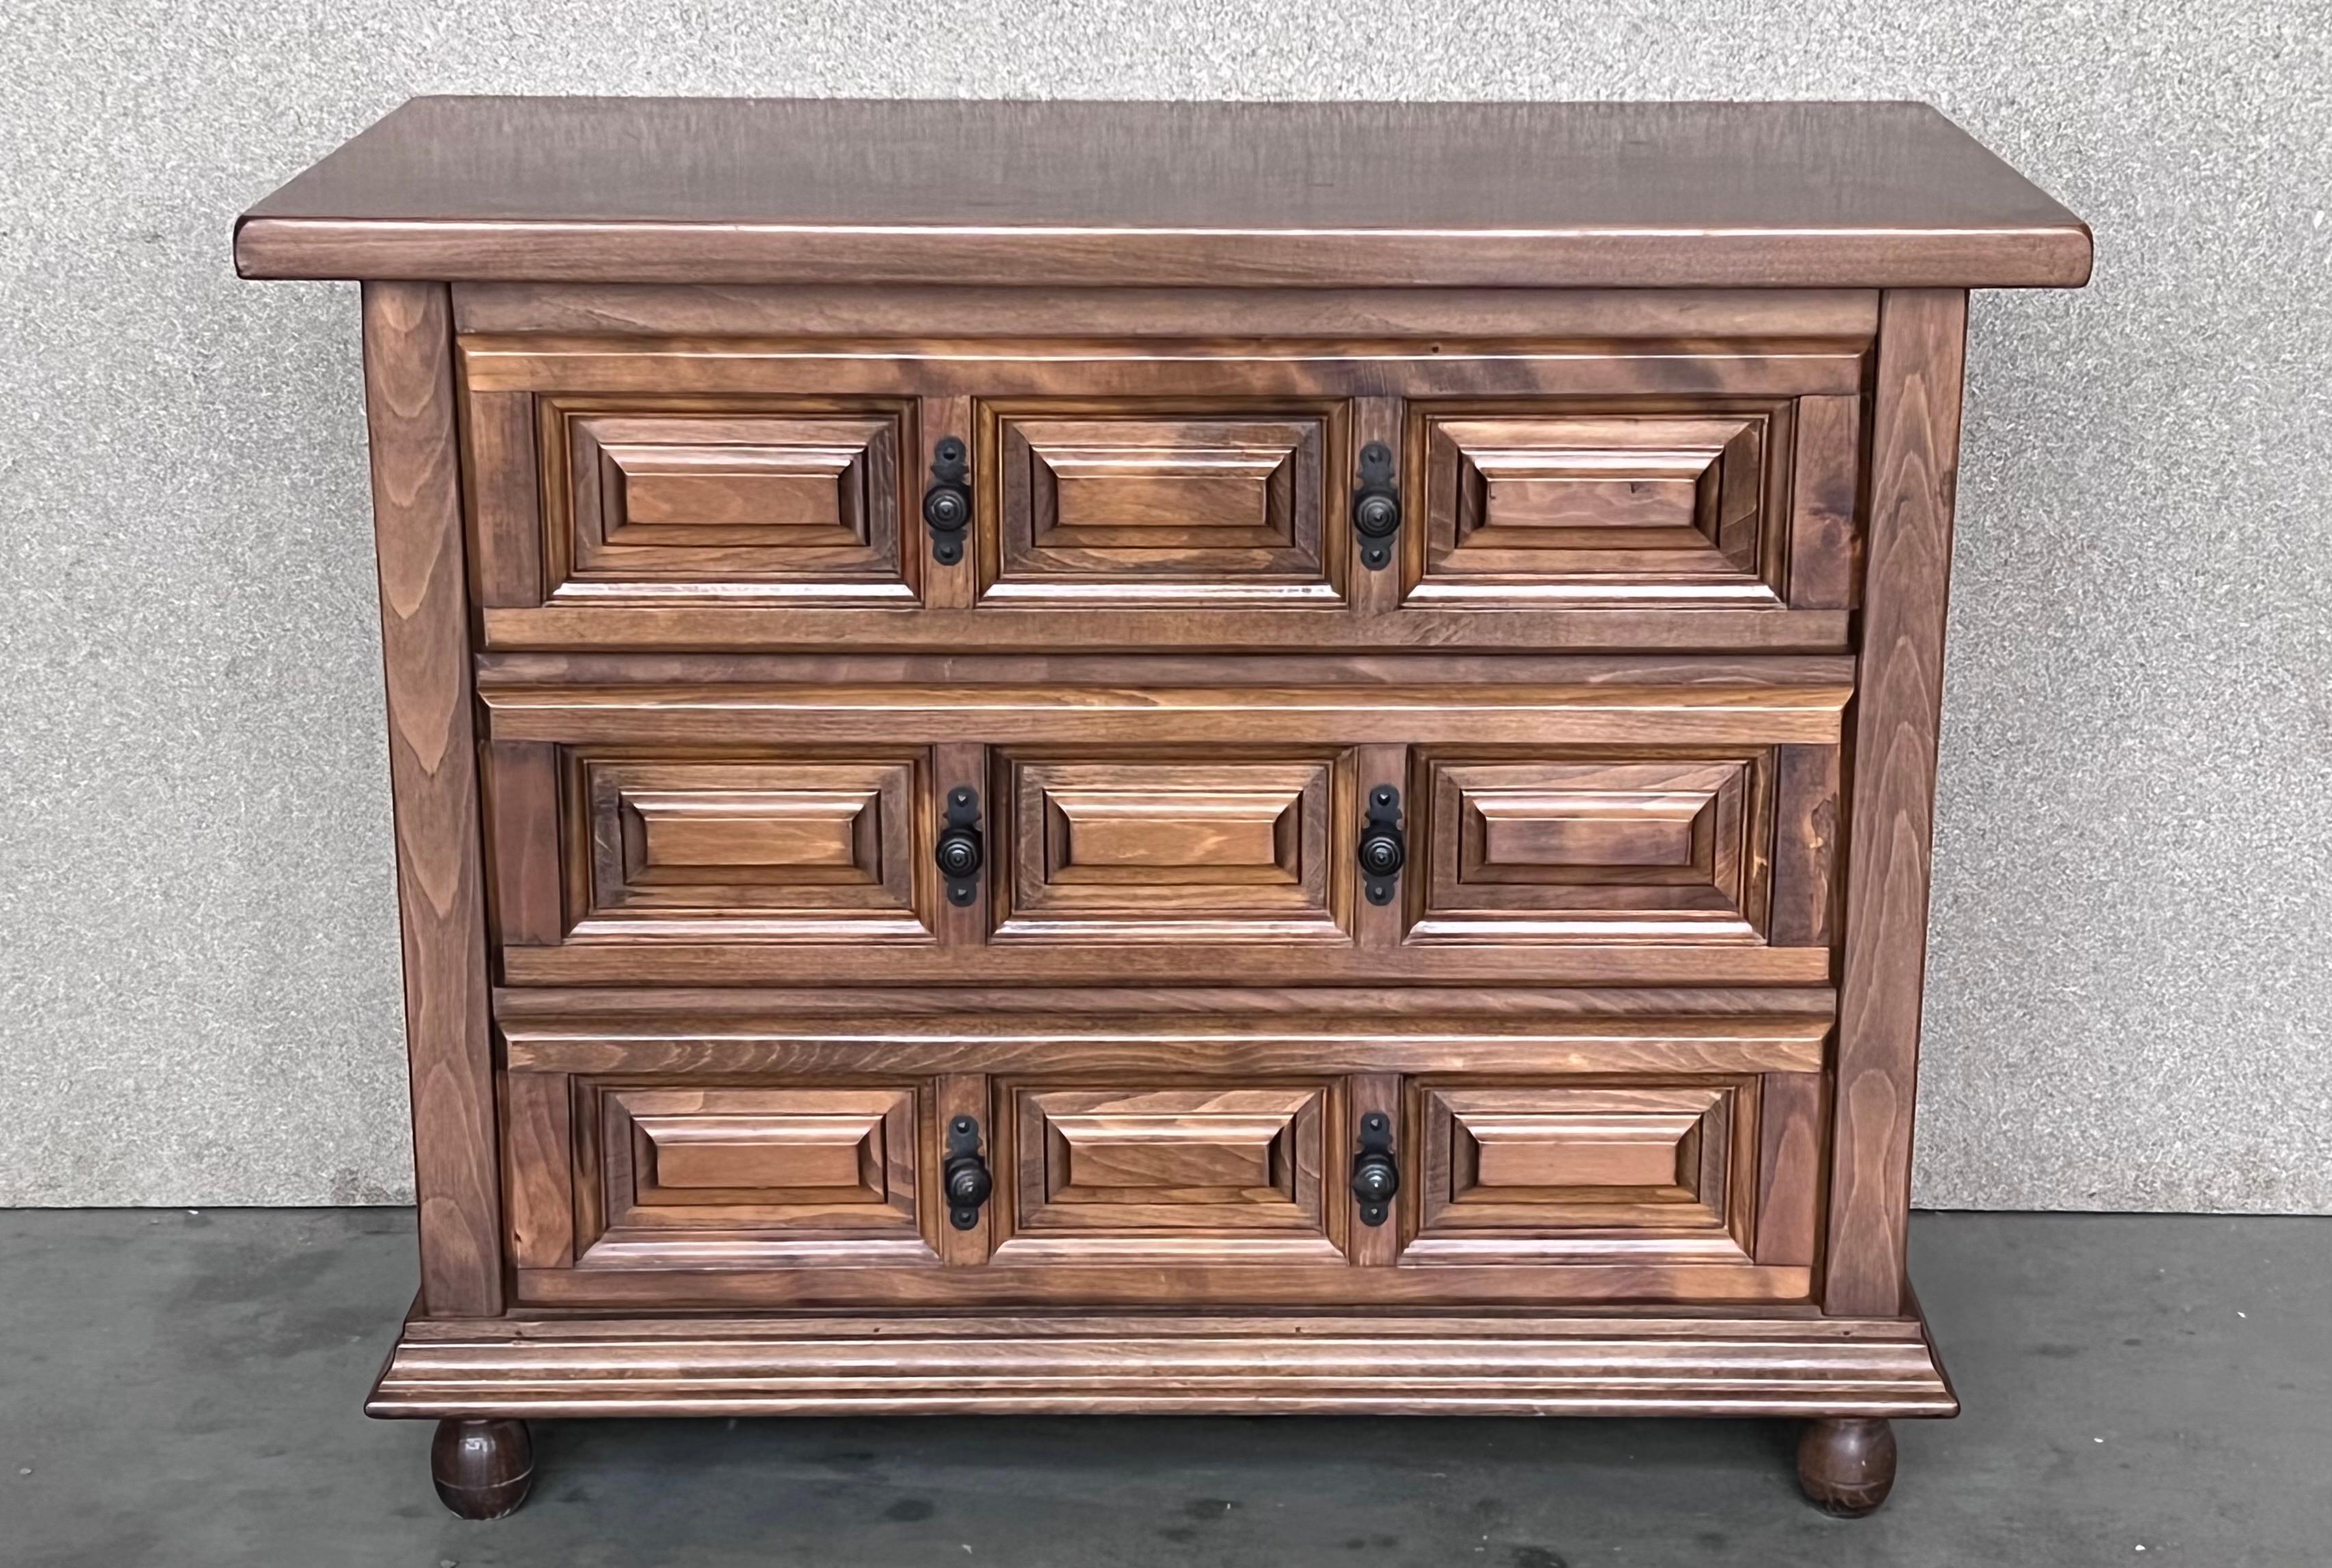 From Northern Spain, constructed of solid walnut, the rectangular top with molded edge atop a conforming case housing three drawers paneled with solid walnut, raised on four round legs.
Carved on the molding sides of the front and original iron